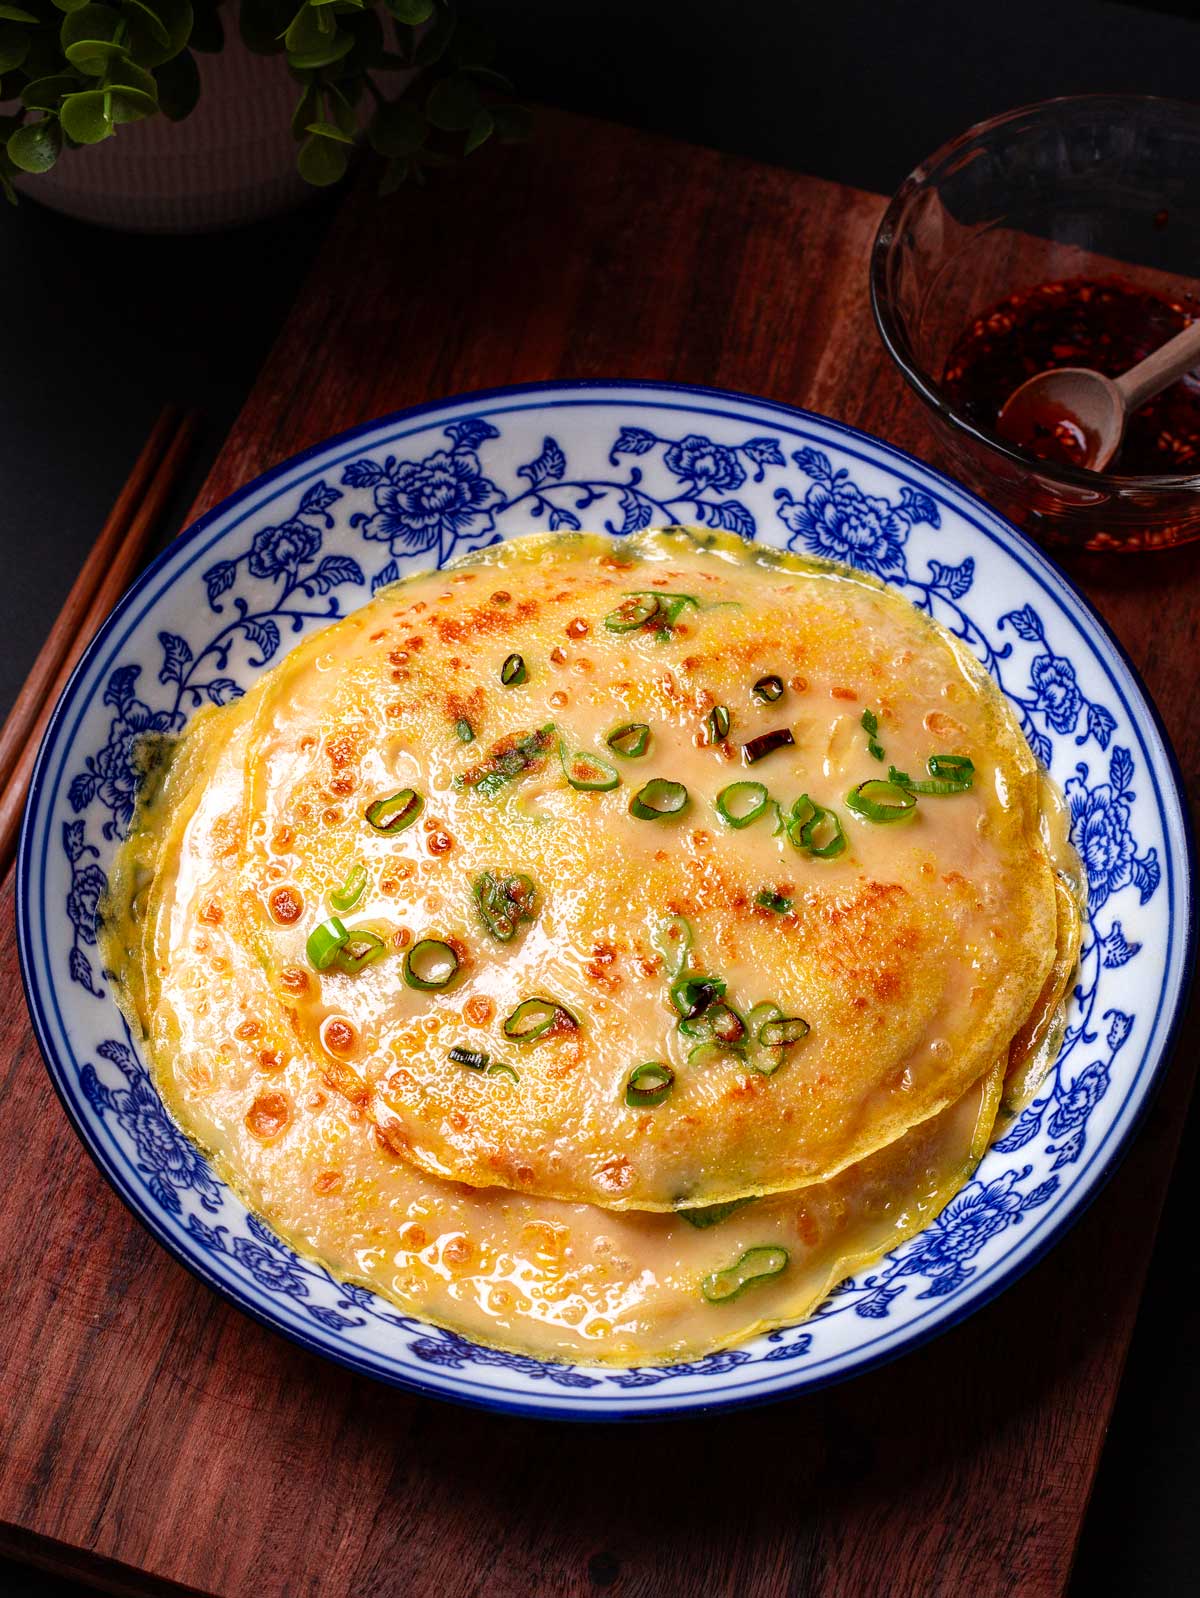 Chinese crepes